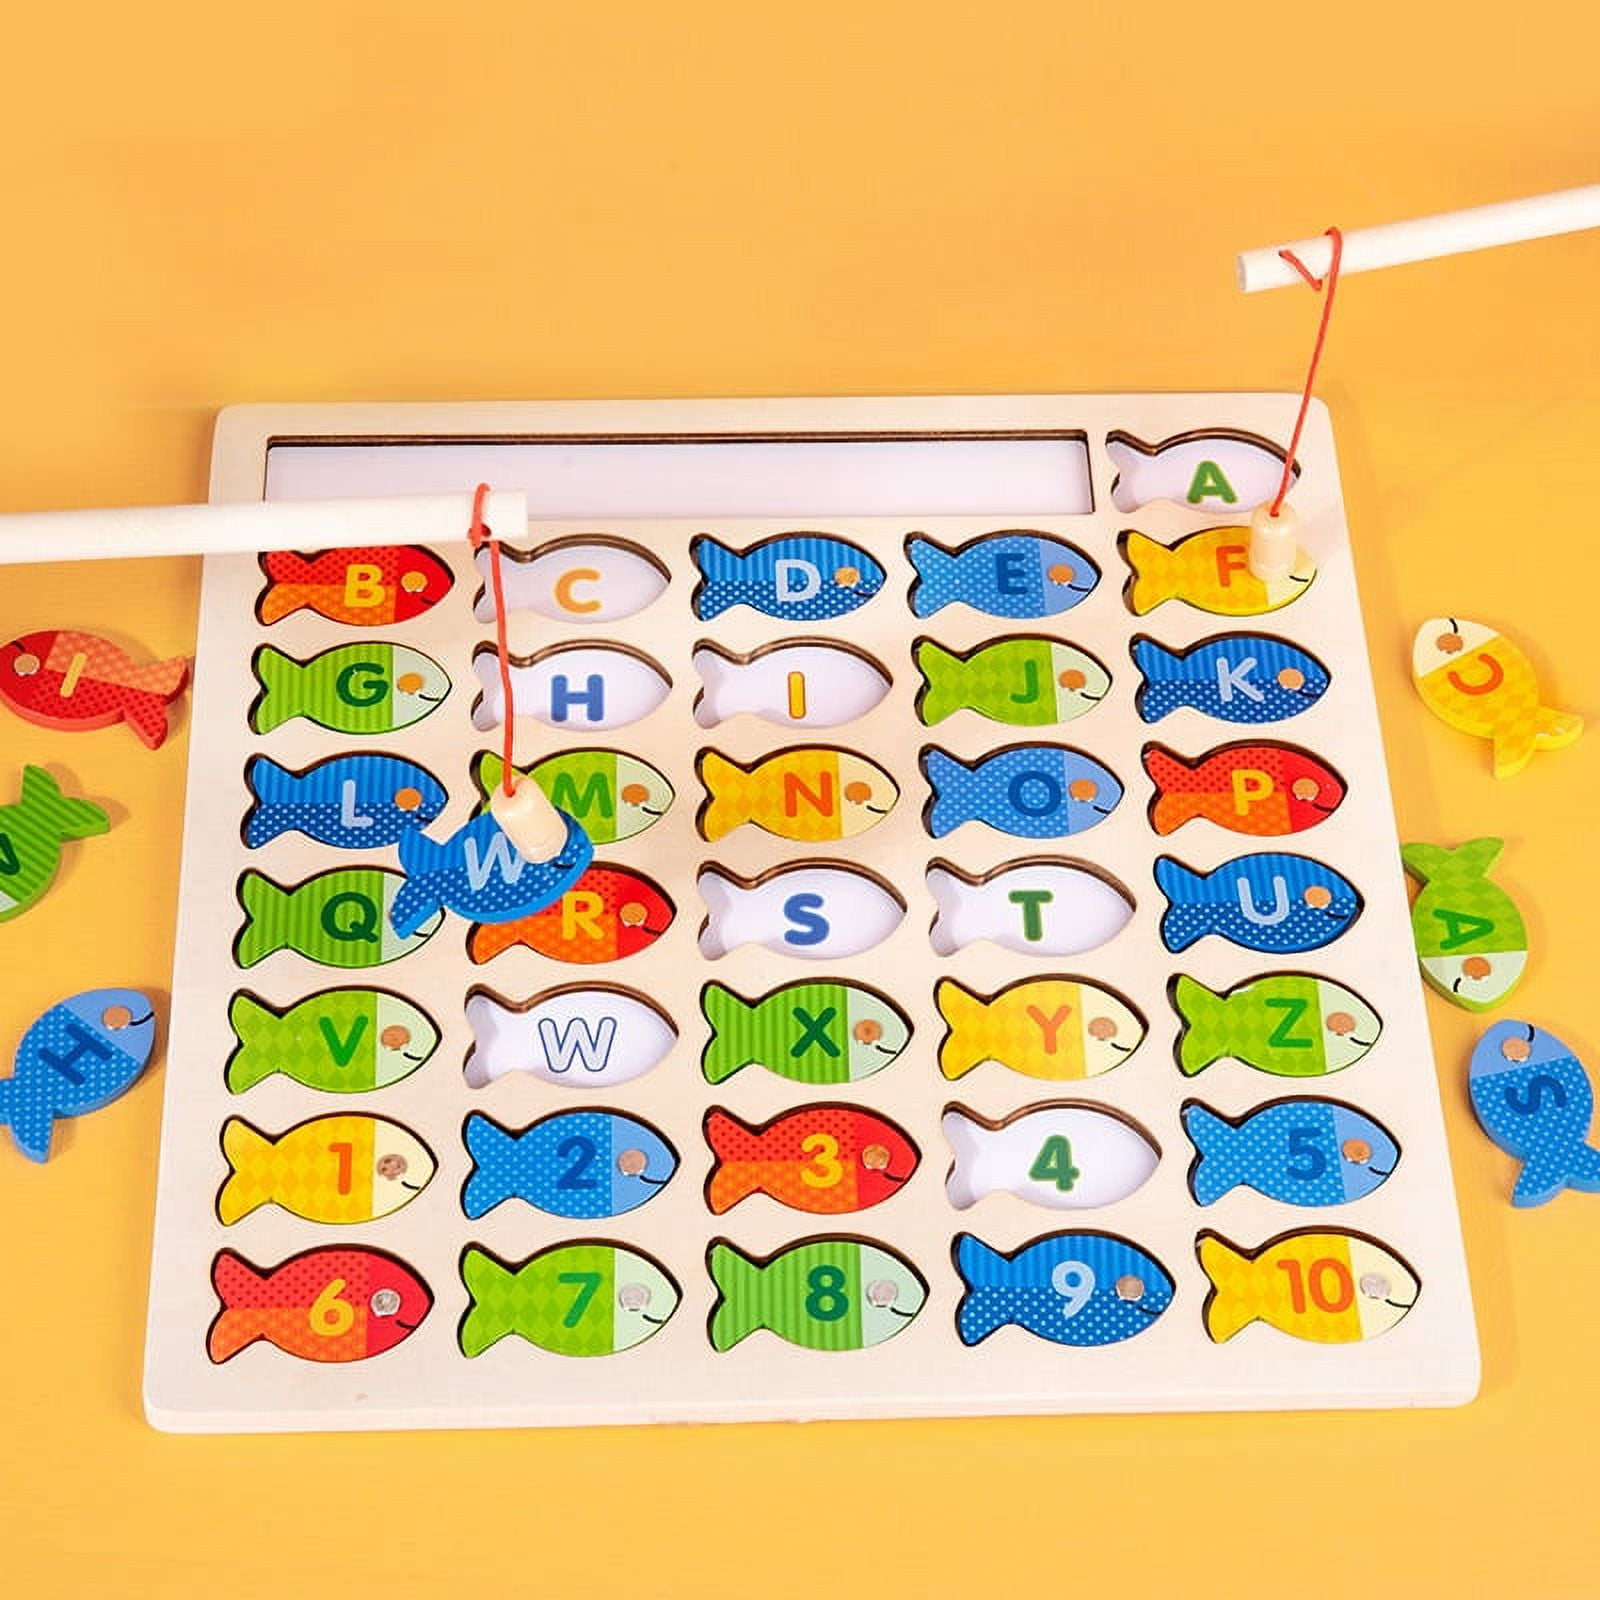  Coogam Magnetic Alphabet Numbers Fishing Game, Wooden ABC  Letter Numbers Color Matching Puzzle Fine Motor Montessori Educational Toy  for Preschool 3 4 5 Year Old Toddlers : Toys & Games